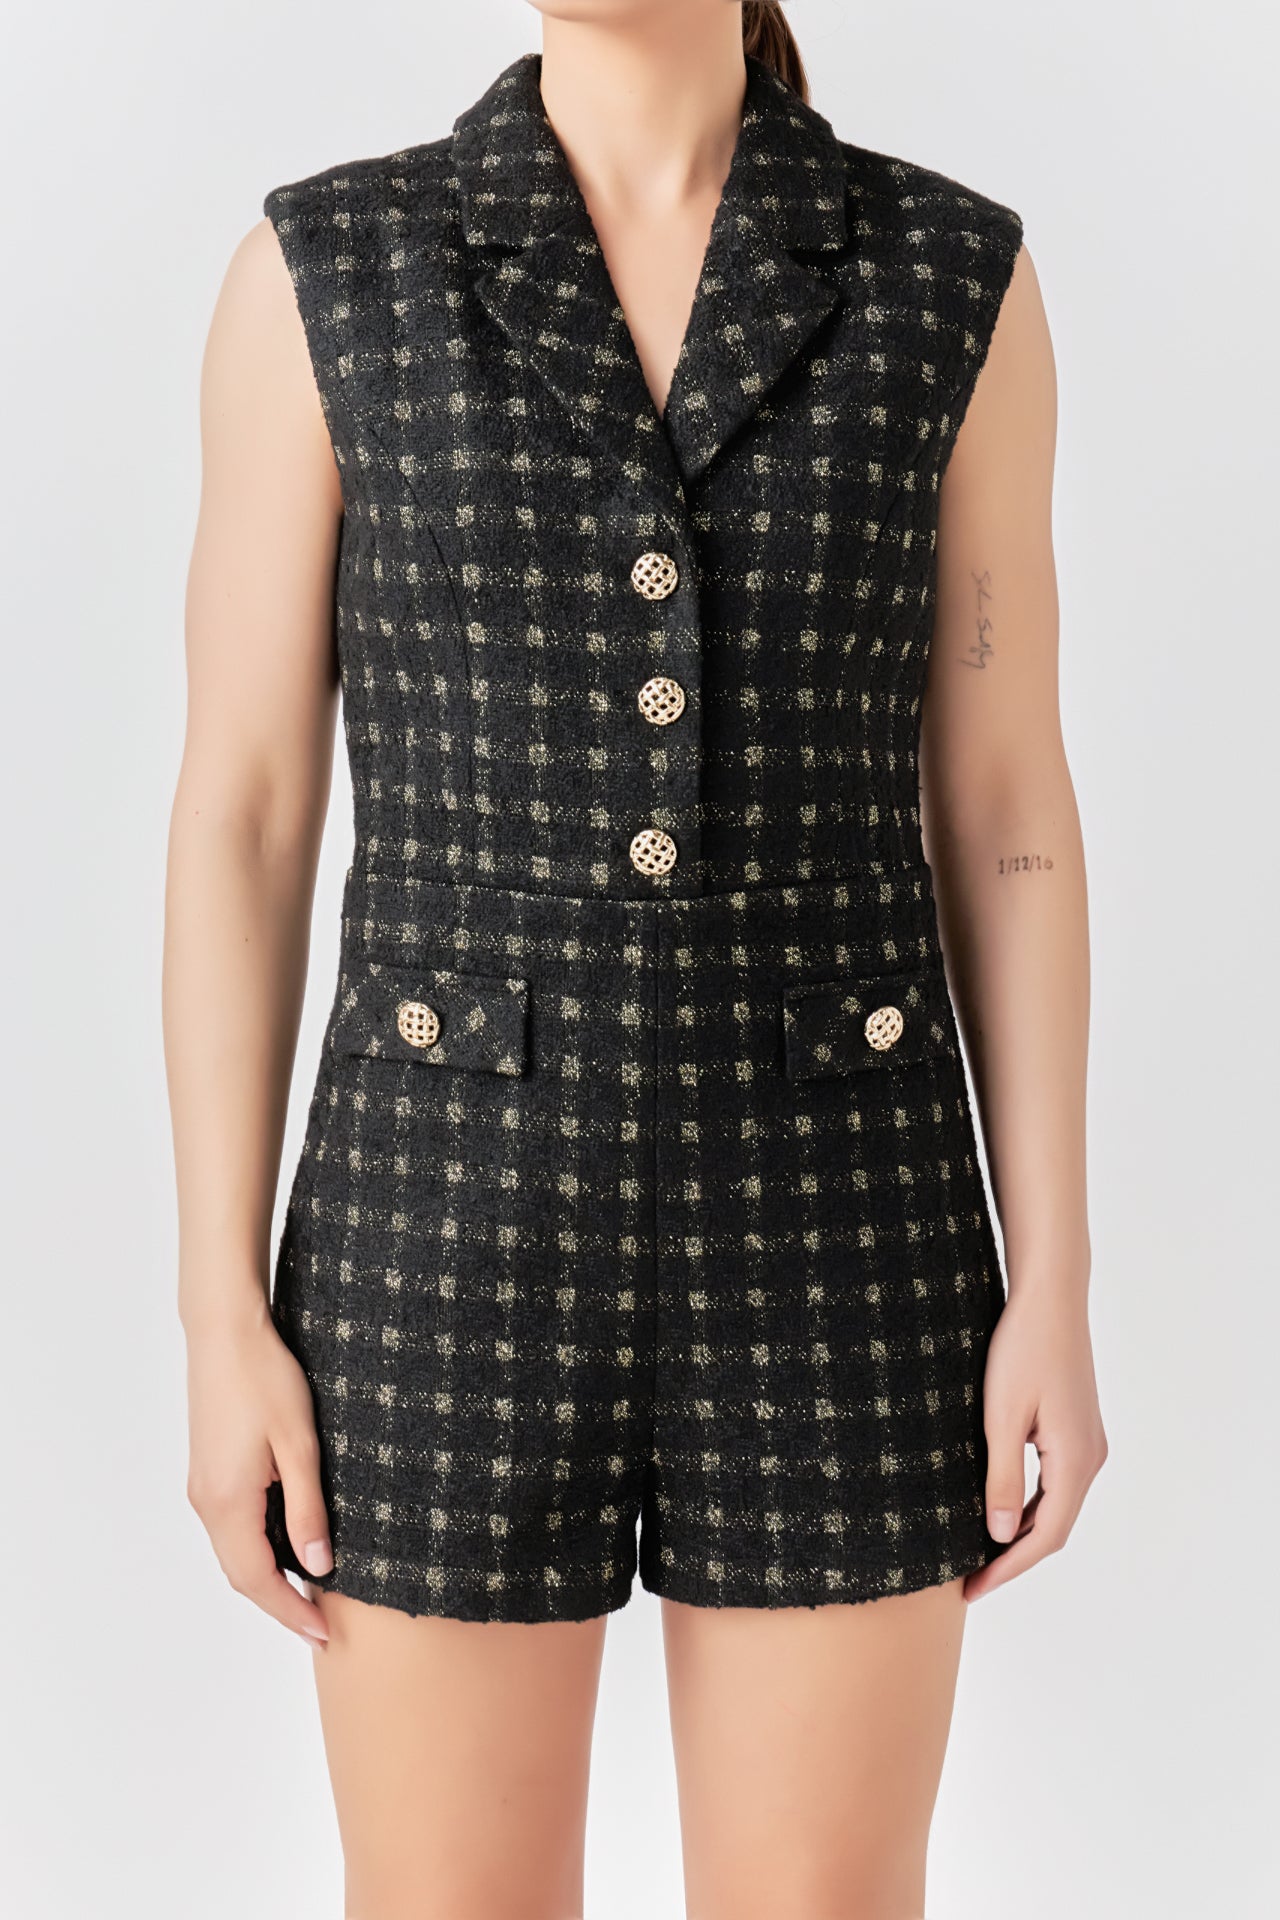 ENDLESS ROSE - Sleeveless Tweed Suited Romper - ROMPERS available at Objectrare